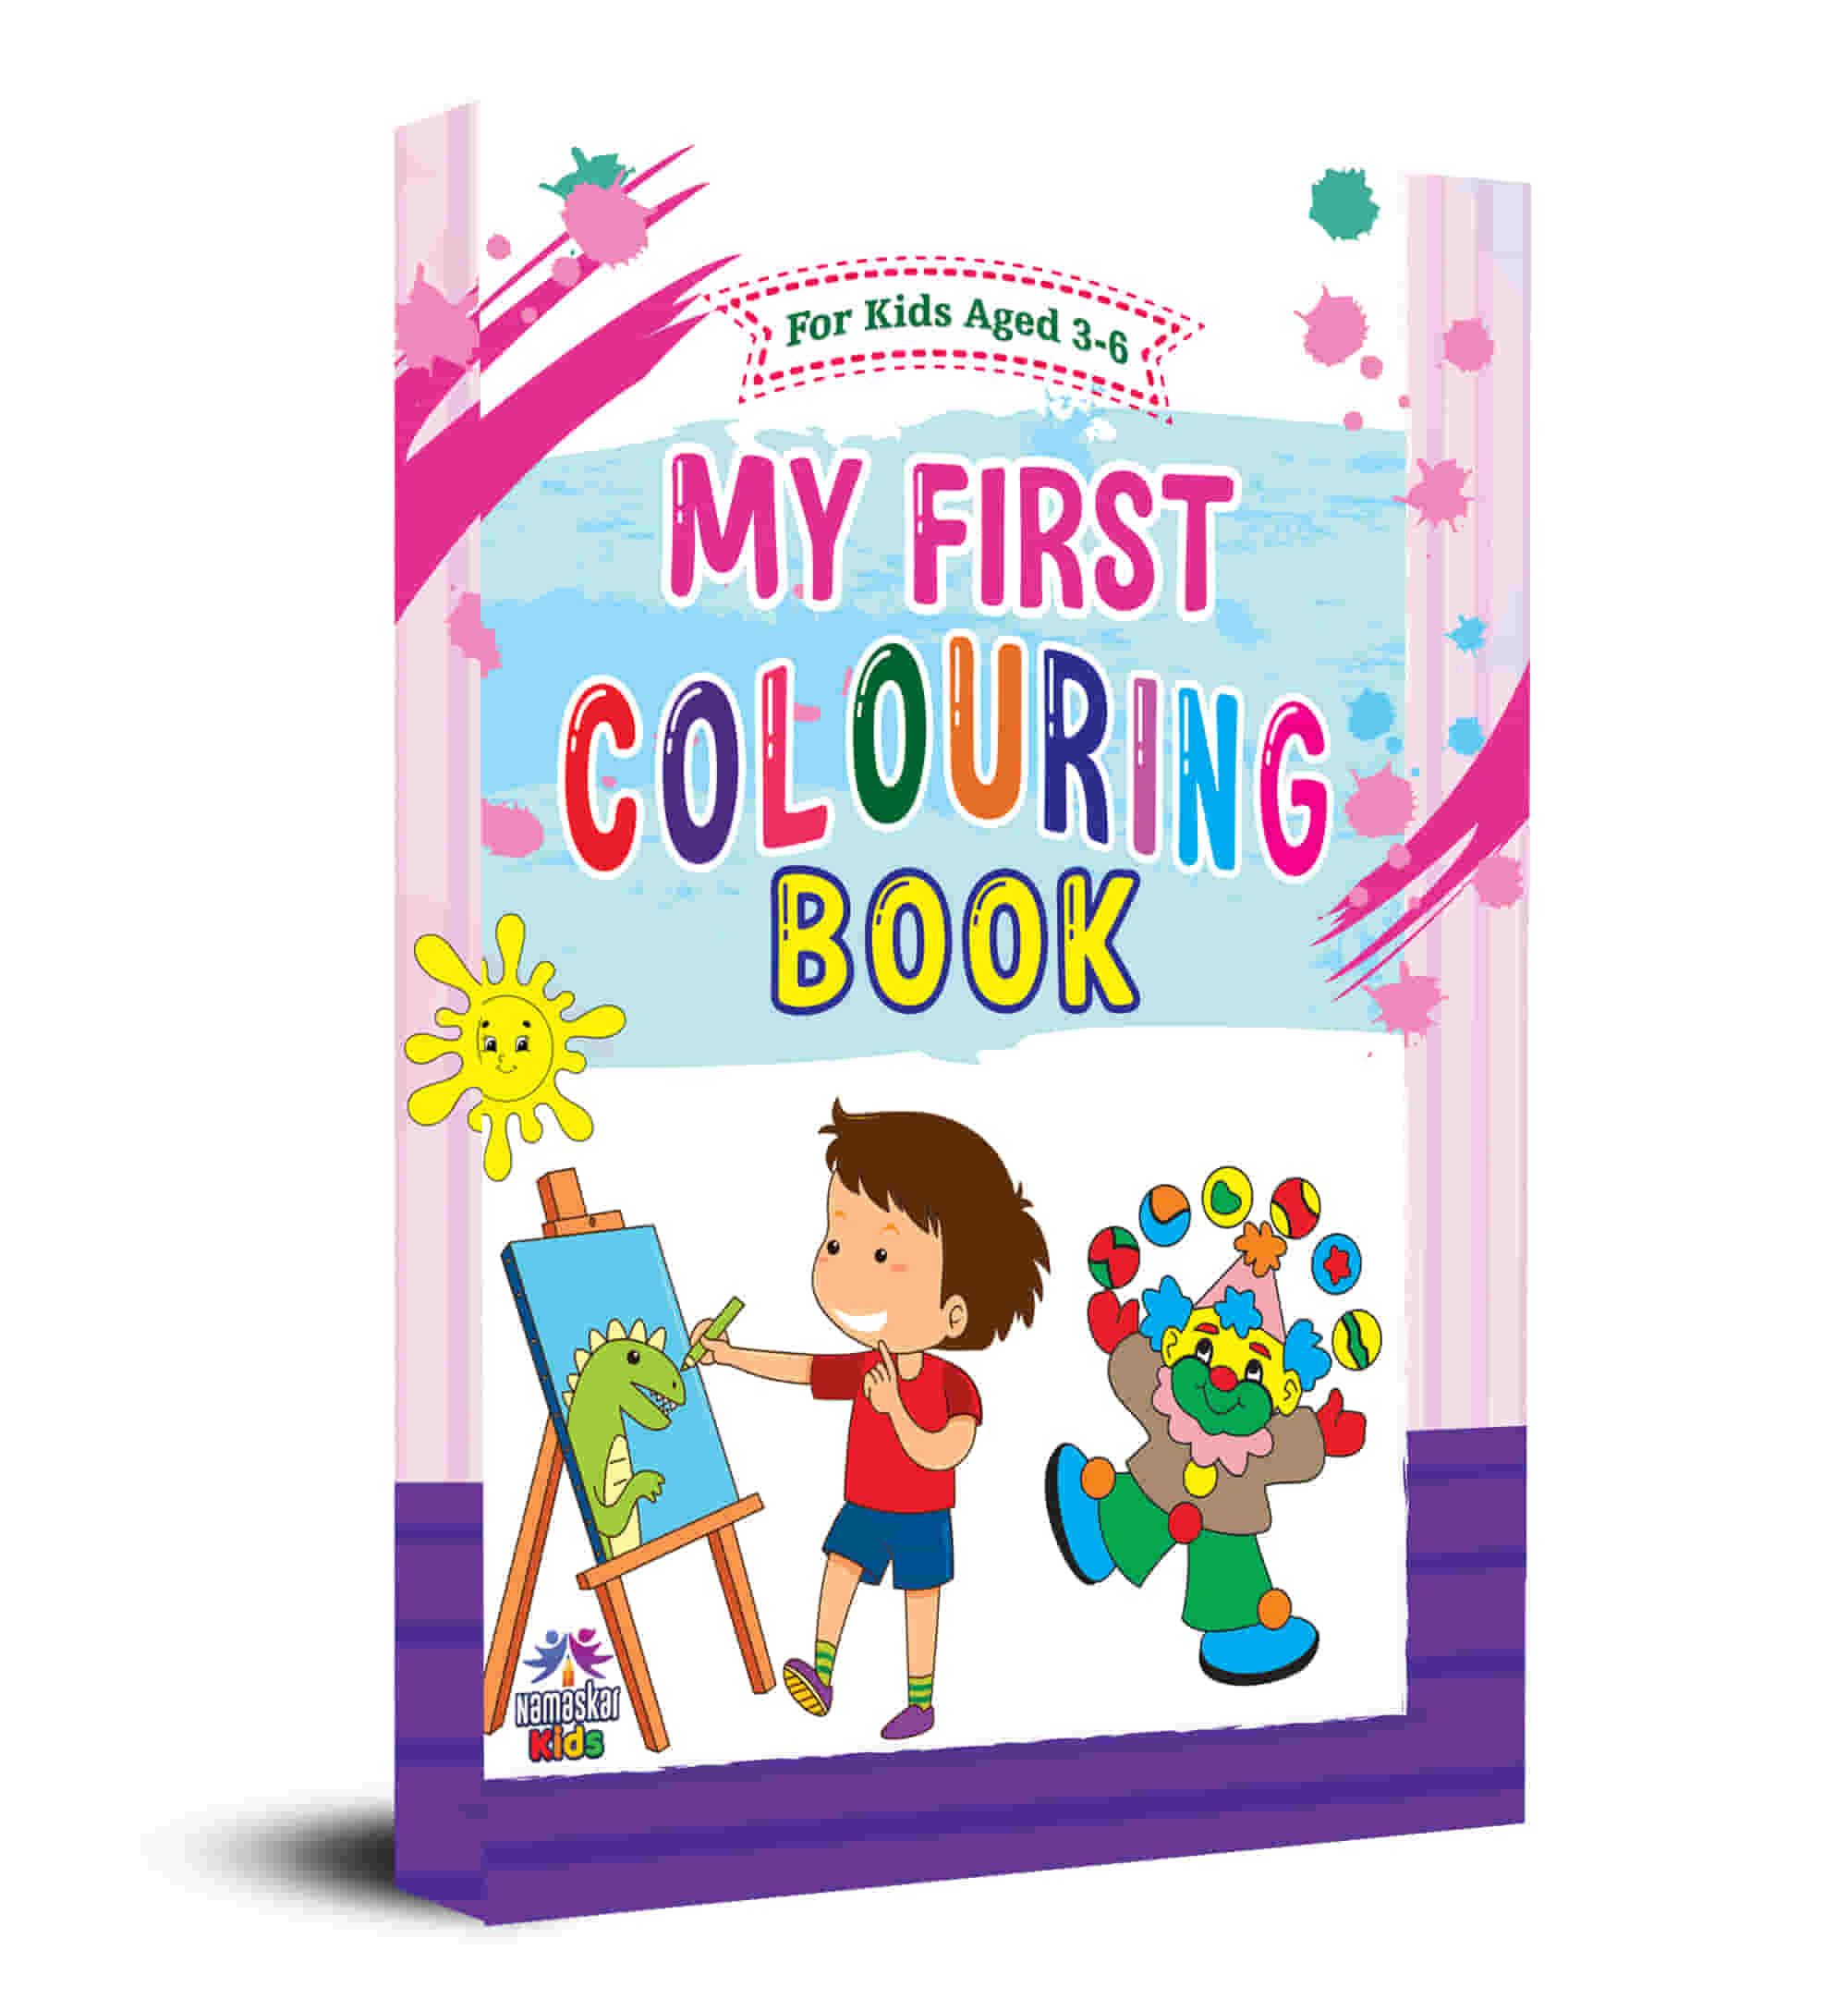 My First Colouring Book For Kids - Perfect Gift to Children for Painting, Drawing and Coloring Activity, Animal, Flowers, Transport, Alphabet For 3-6 Year Old